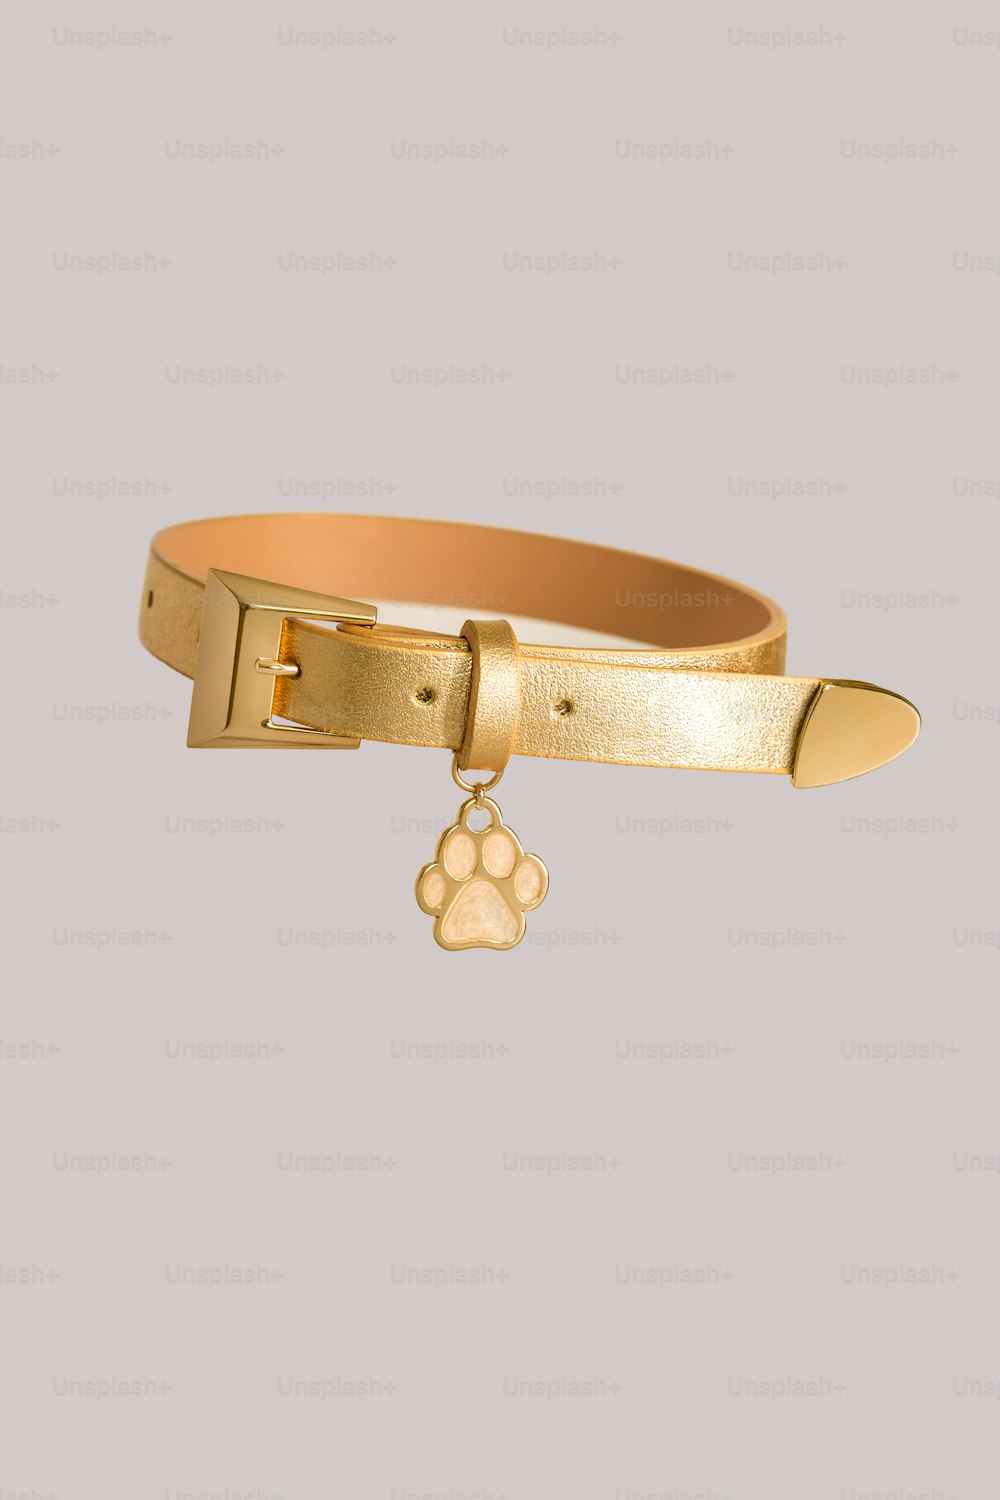 a gold belt with a dog's paw charm